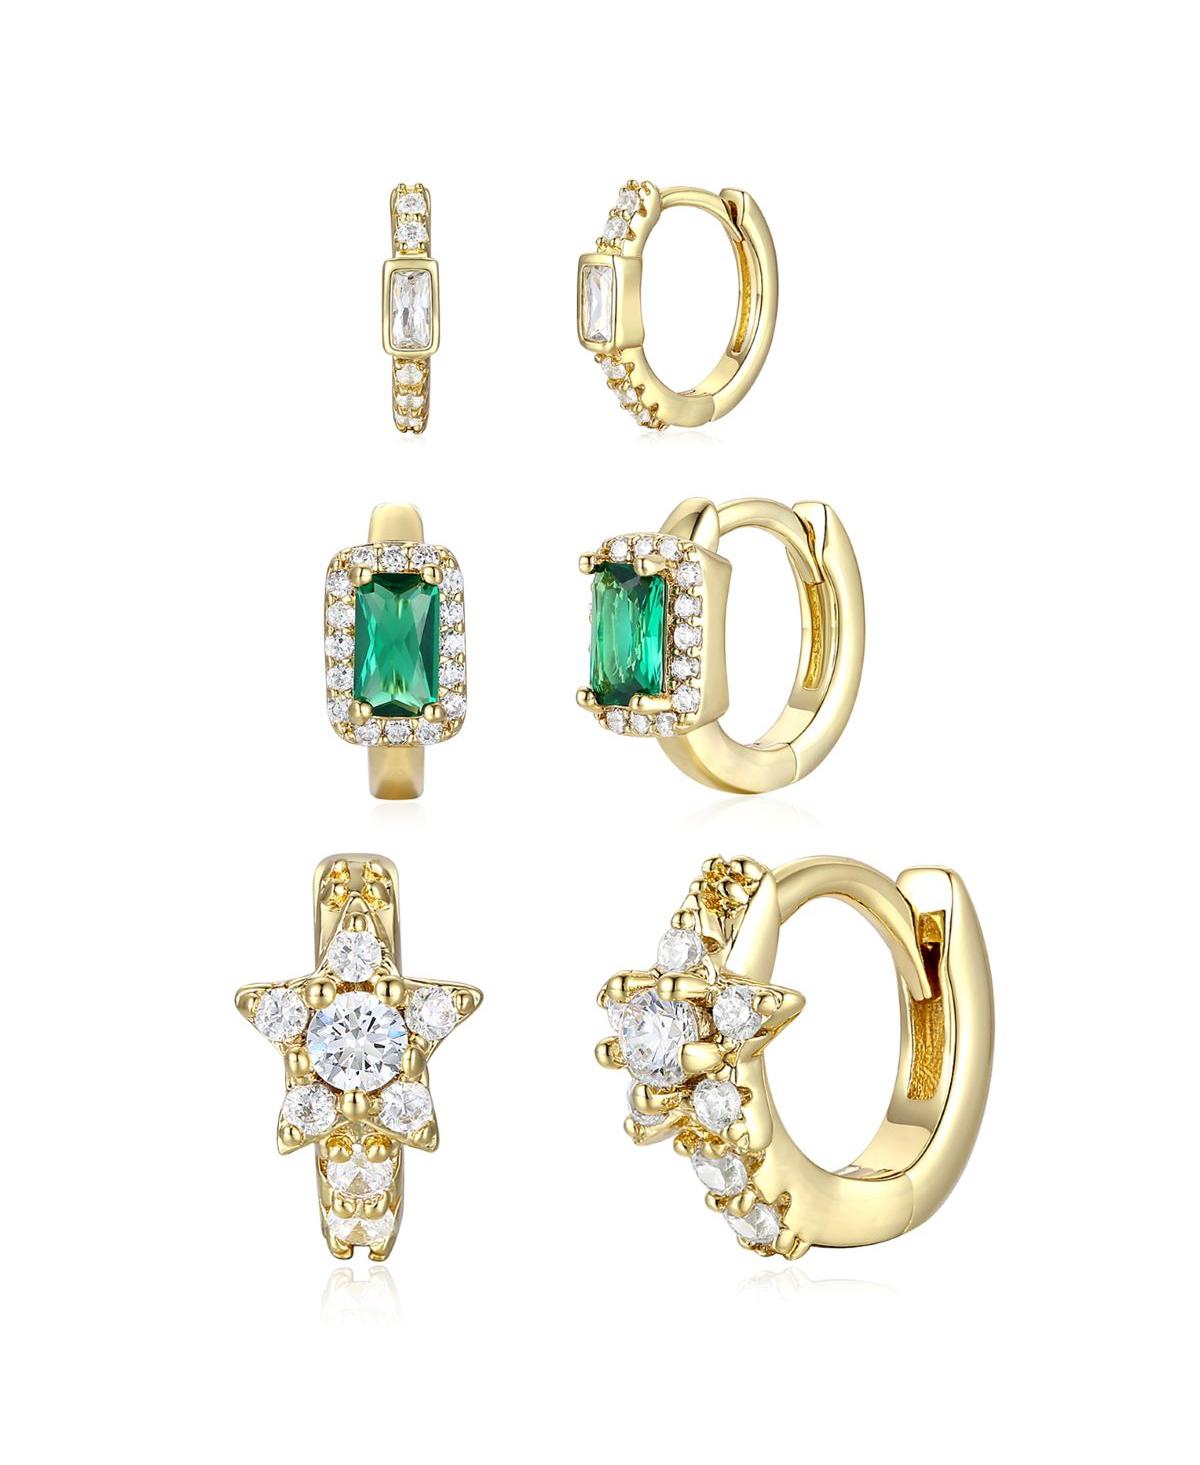 14k Gold Plated with Emerald & Cubic Zirconia Halo Star 3-Piece Hoop Earrings Set - Emerald